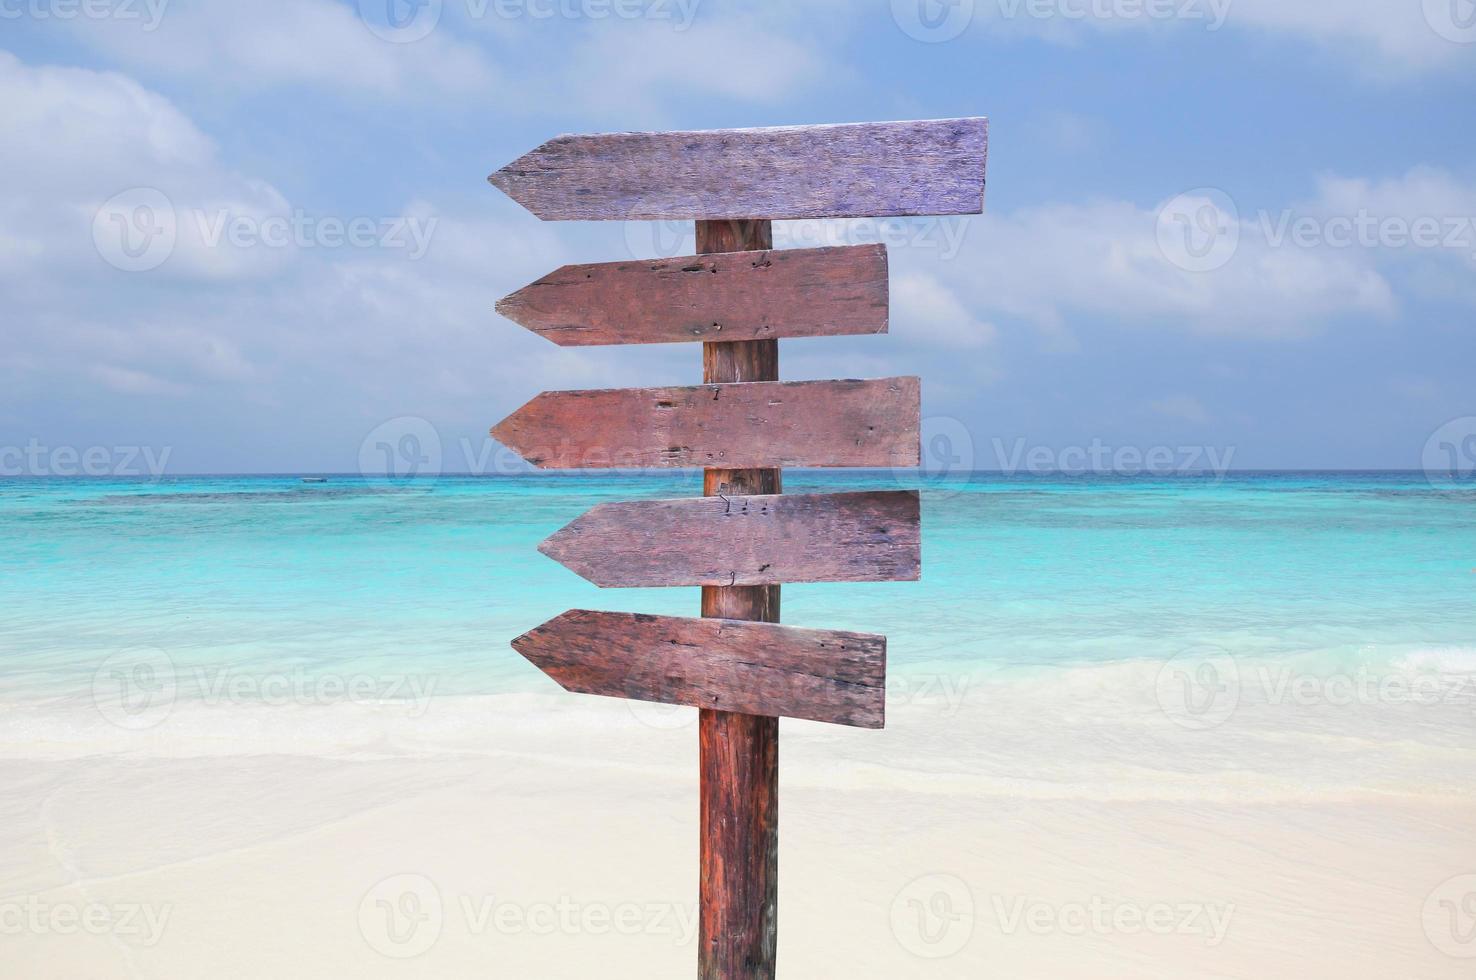 Wood signs for travel directions on the beach with sea and blue sky background. photo